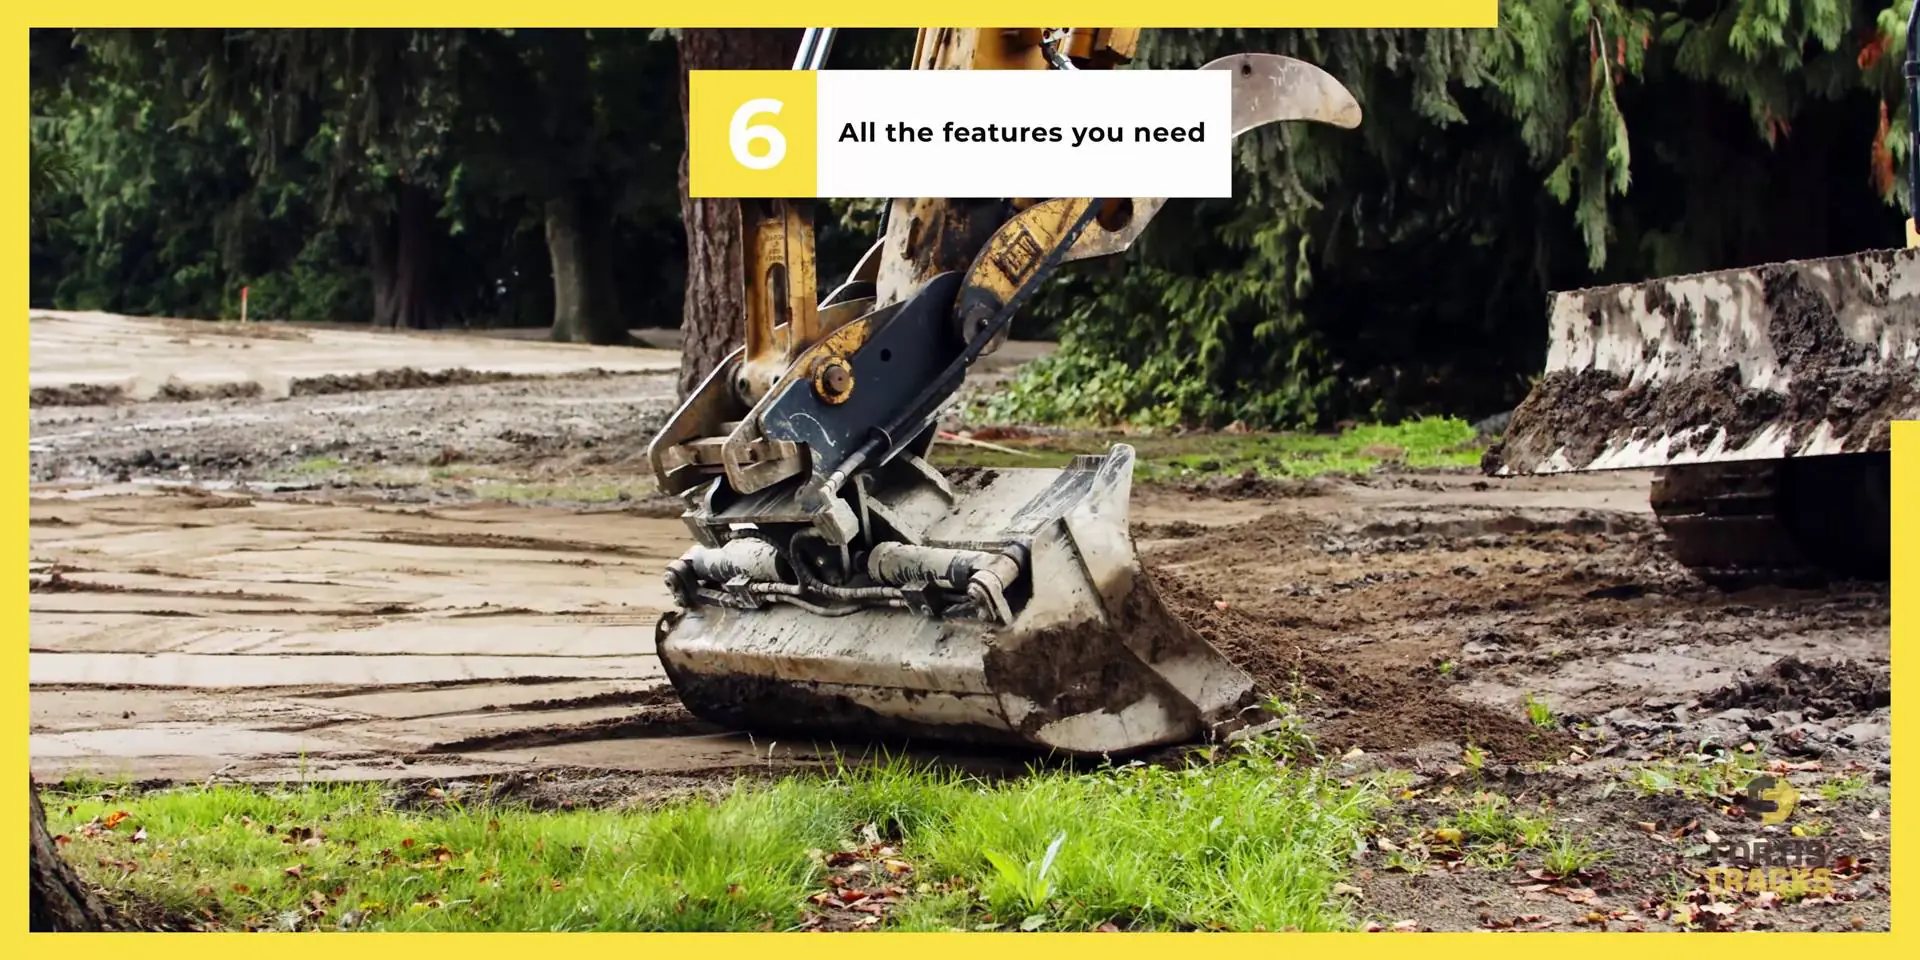 the bucket and thumb of an excavator resting on the ground with a caption that says "all the features you need"